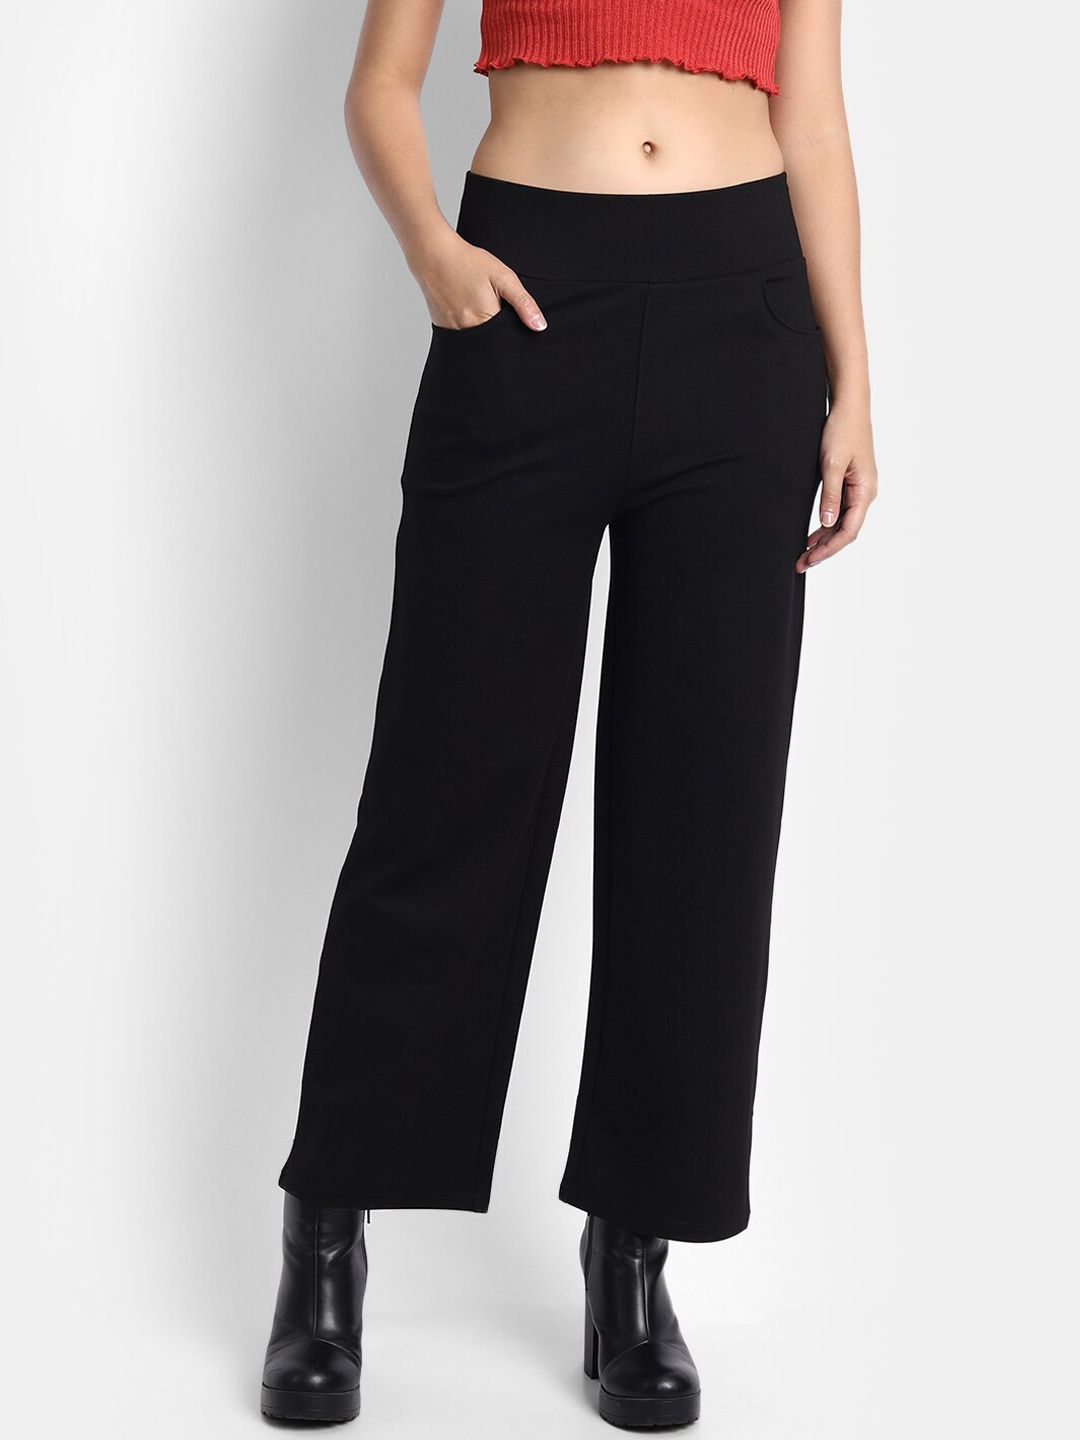 Next One Women Black Straight Fit High-Rise Trousers Price in India